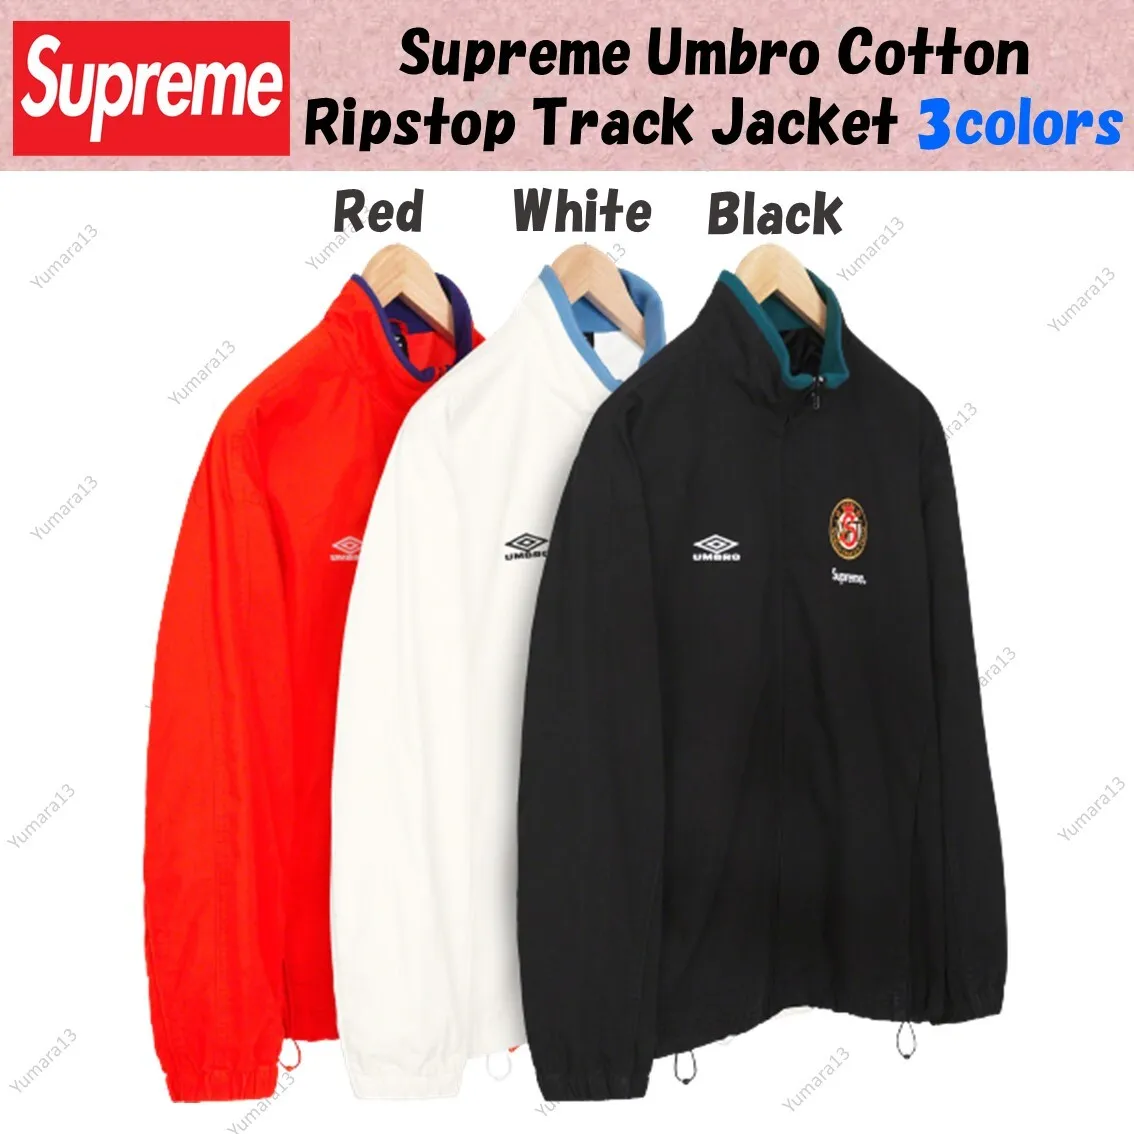 Supreme Umbro Cotton Ripstop Track Jacket Black White Red 3colors Size  S-XXL New